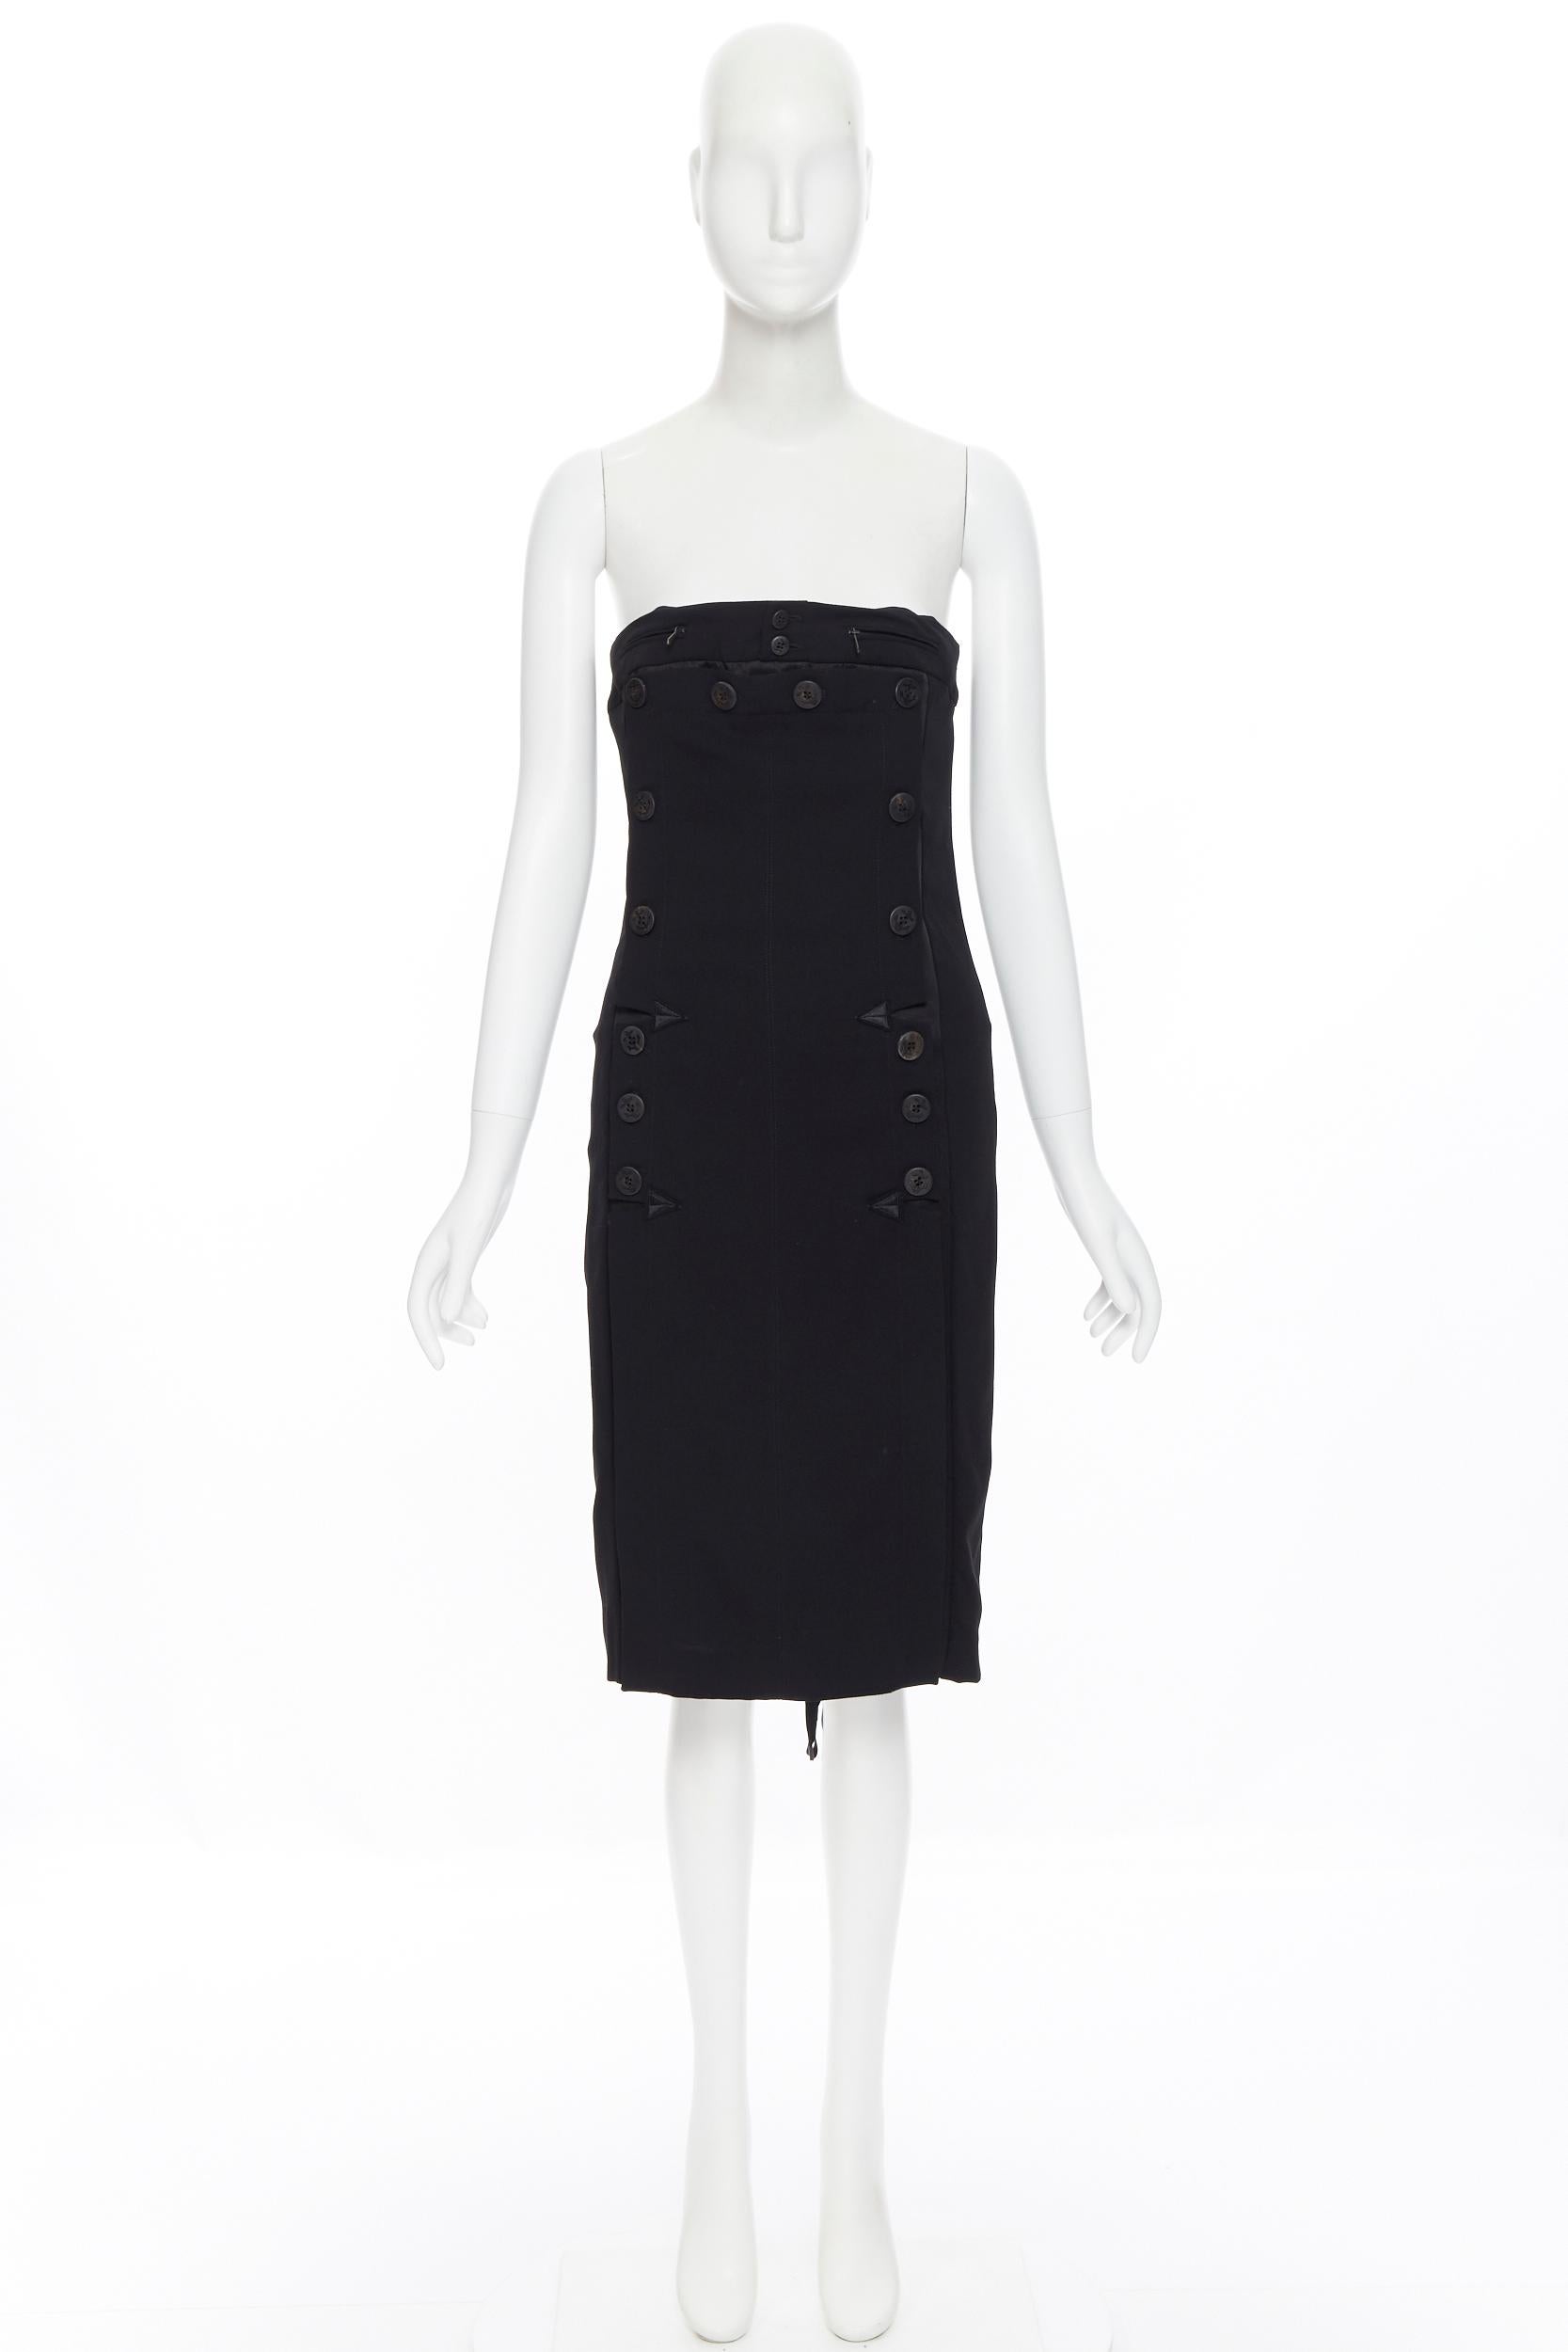 Black JEAN PAUL GAULTIER 2 black nautical button double breasted strapless dress IT42